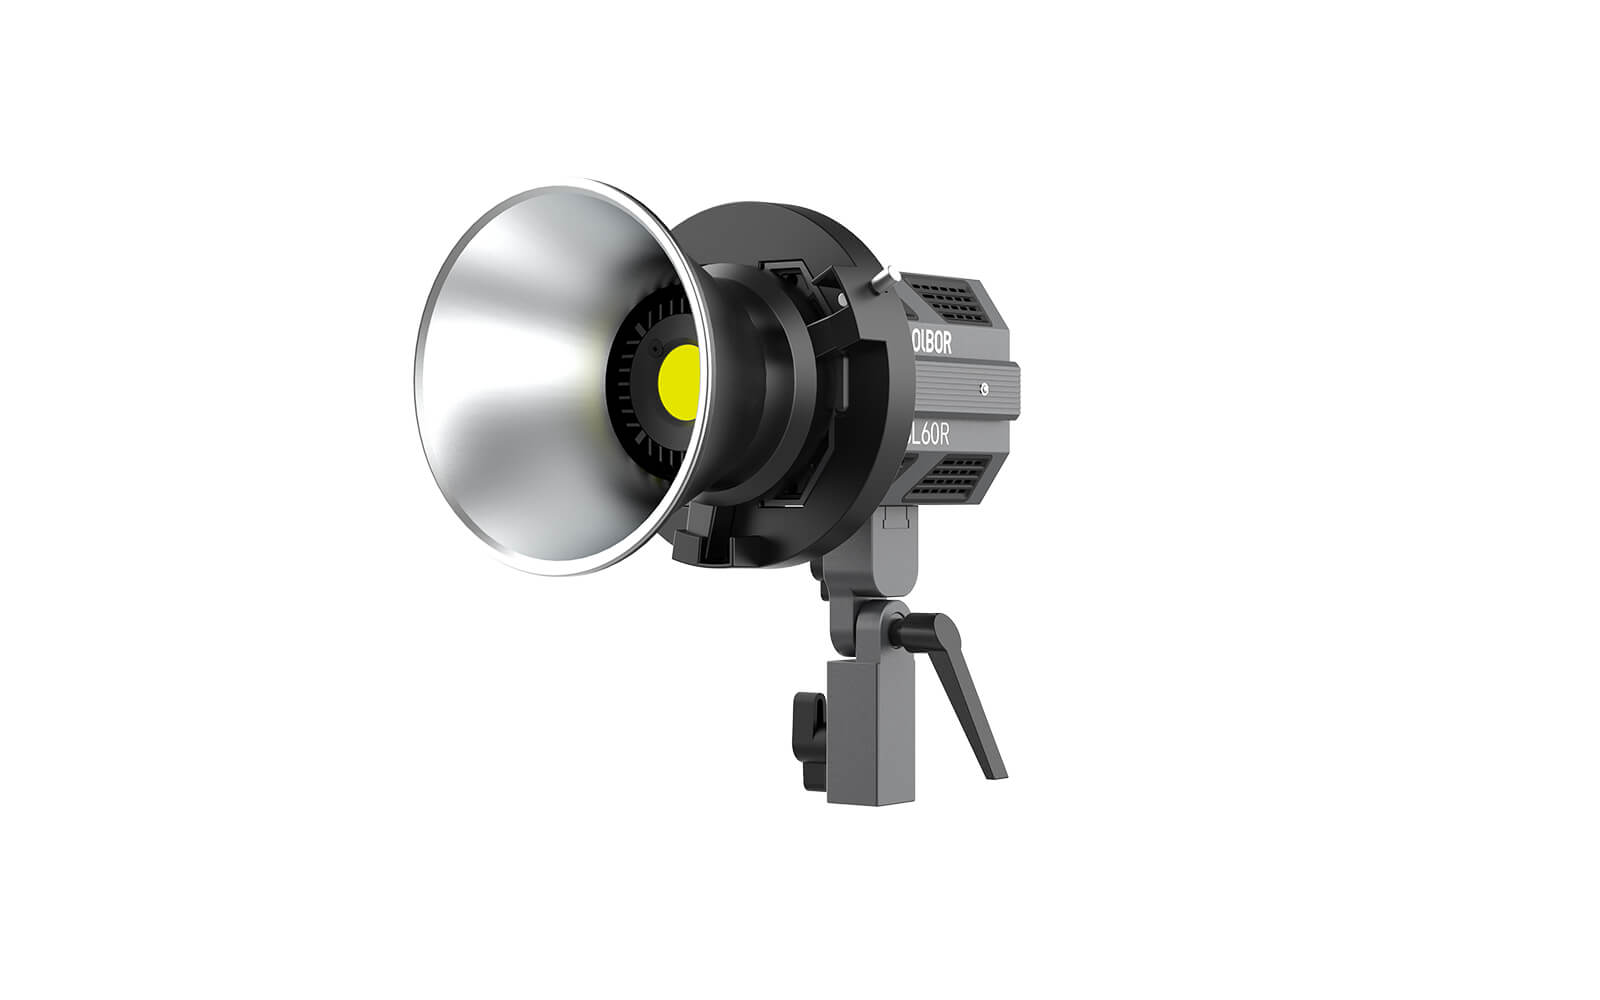 COLBOR CL60R RGB LED light comes with Bowen-mount adapter, reflector, and light base.